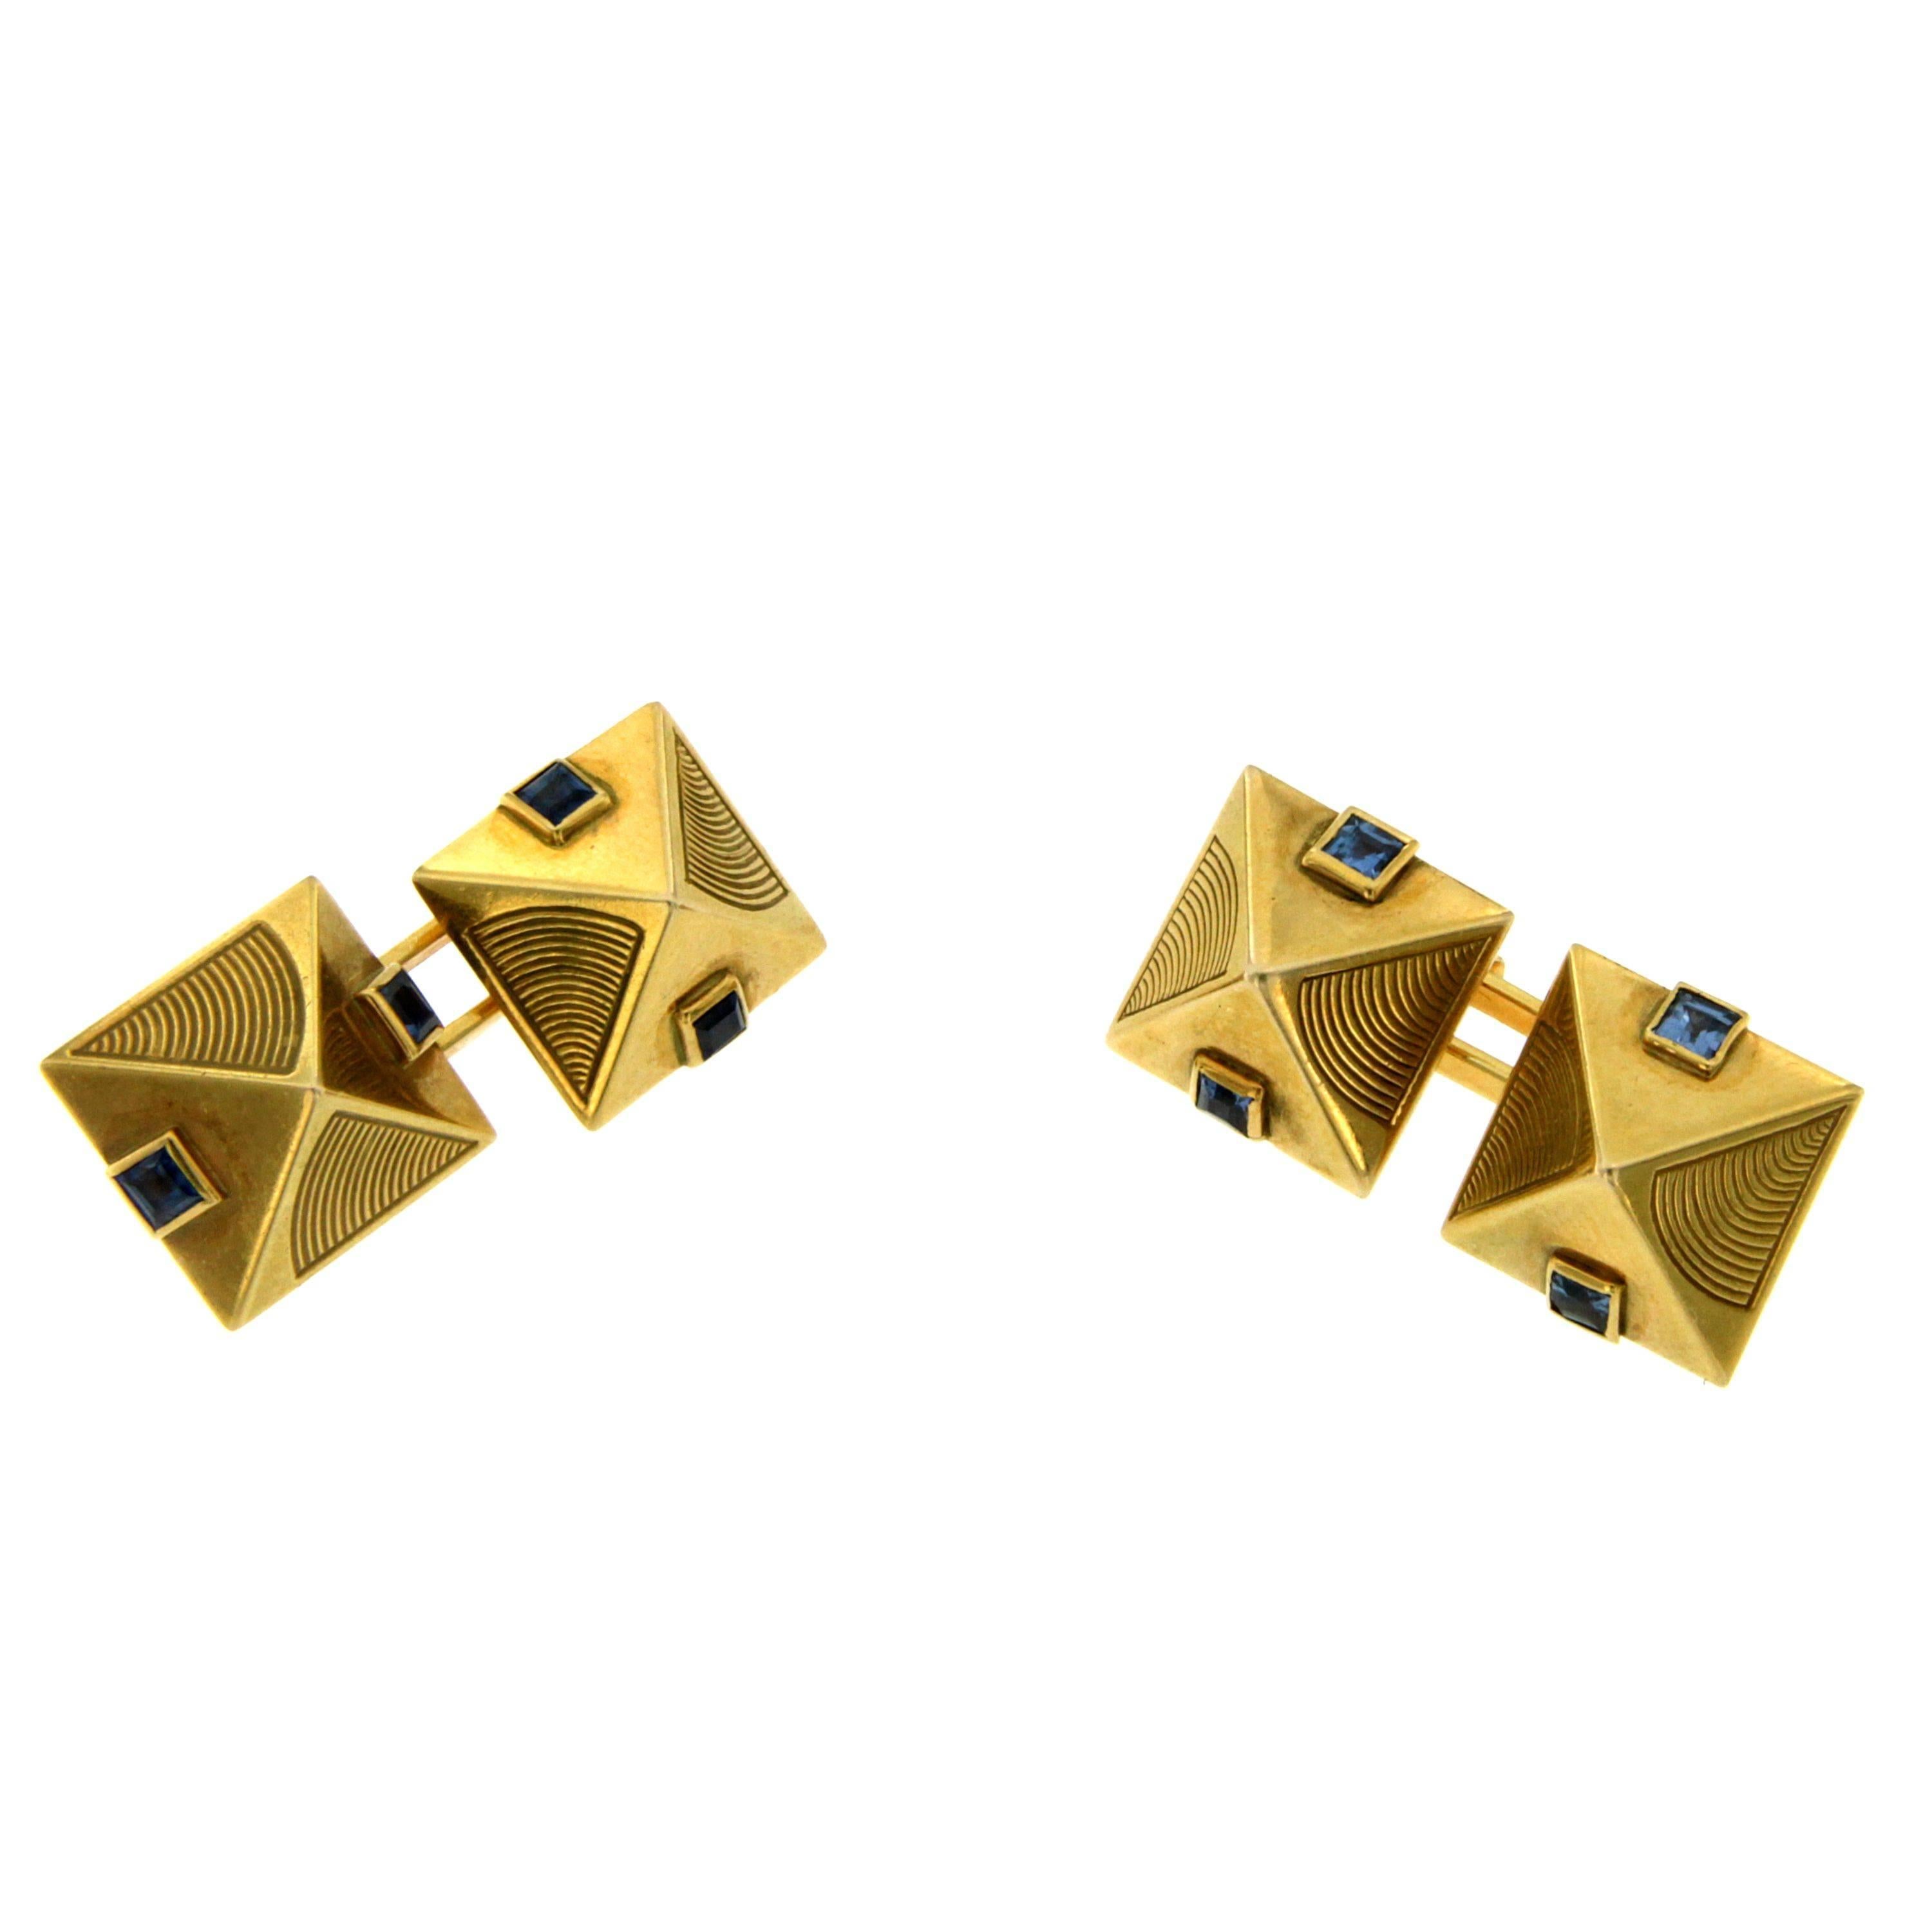 Made and signed by Van Cleef & Arpels New York (dcany), numbered, circa 1940.
The cufflinks are made in 18kt yellow gold, they feature 0.40 carat total weight of calibre cut sapphire.
Gross weight: 9.8 Grams
